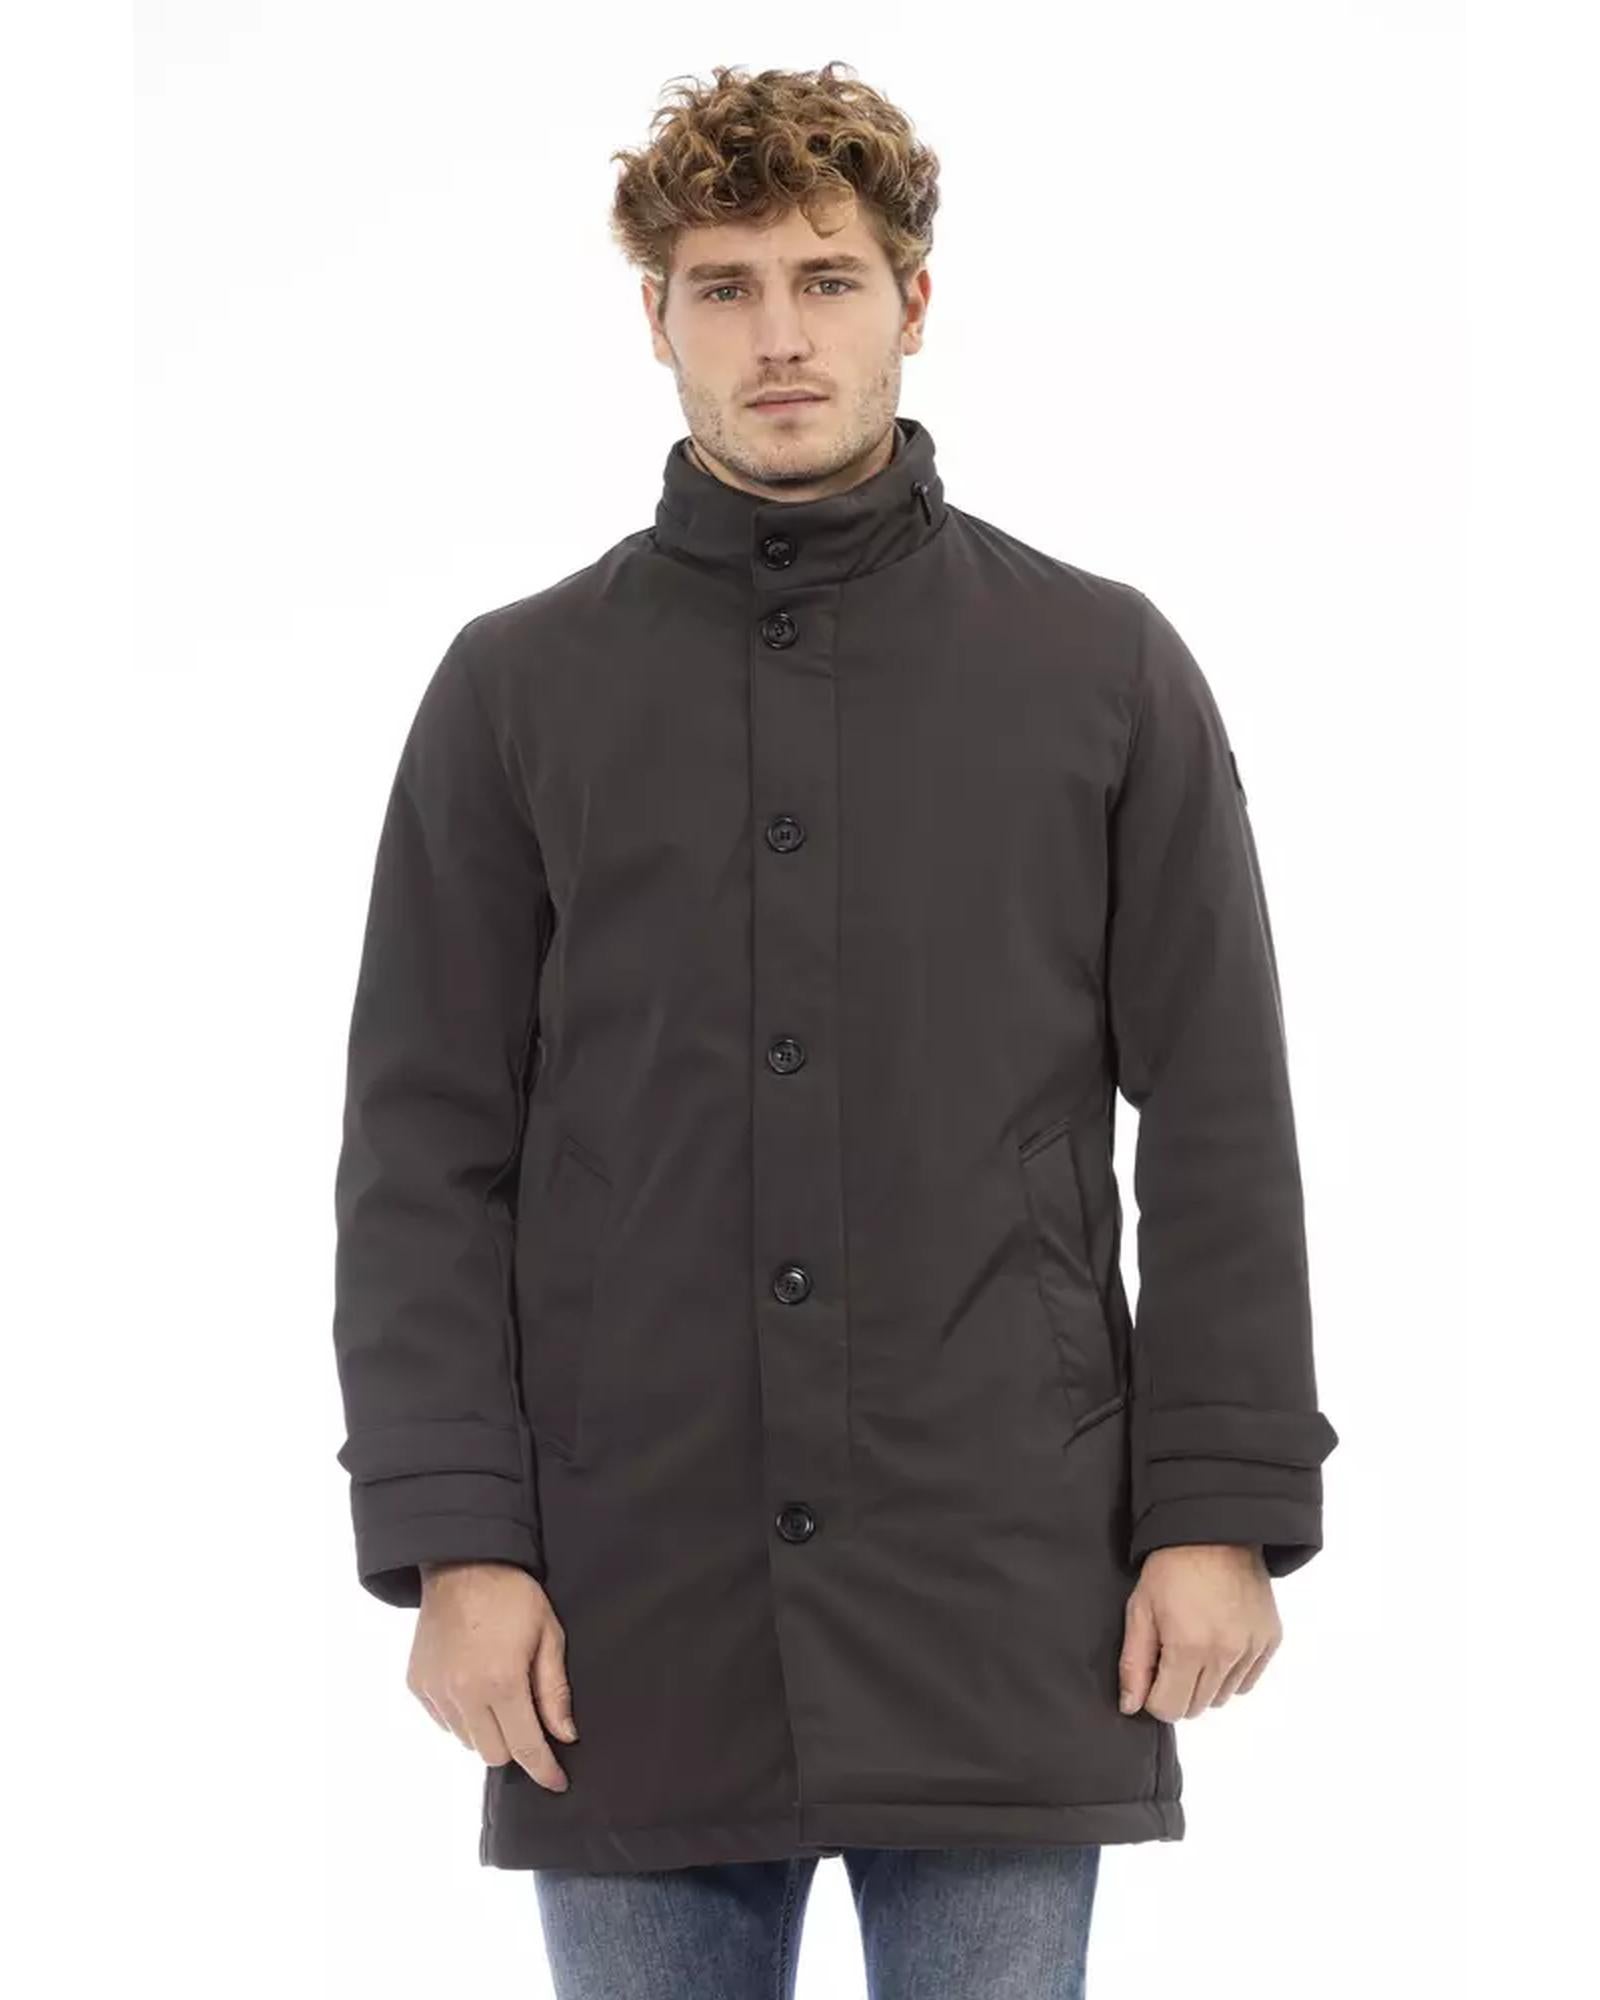 Stylish Long Jacket with Welt Pockets and Zip/Button Closure 3XL Men